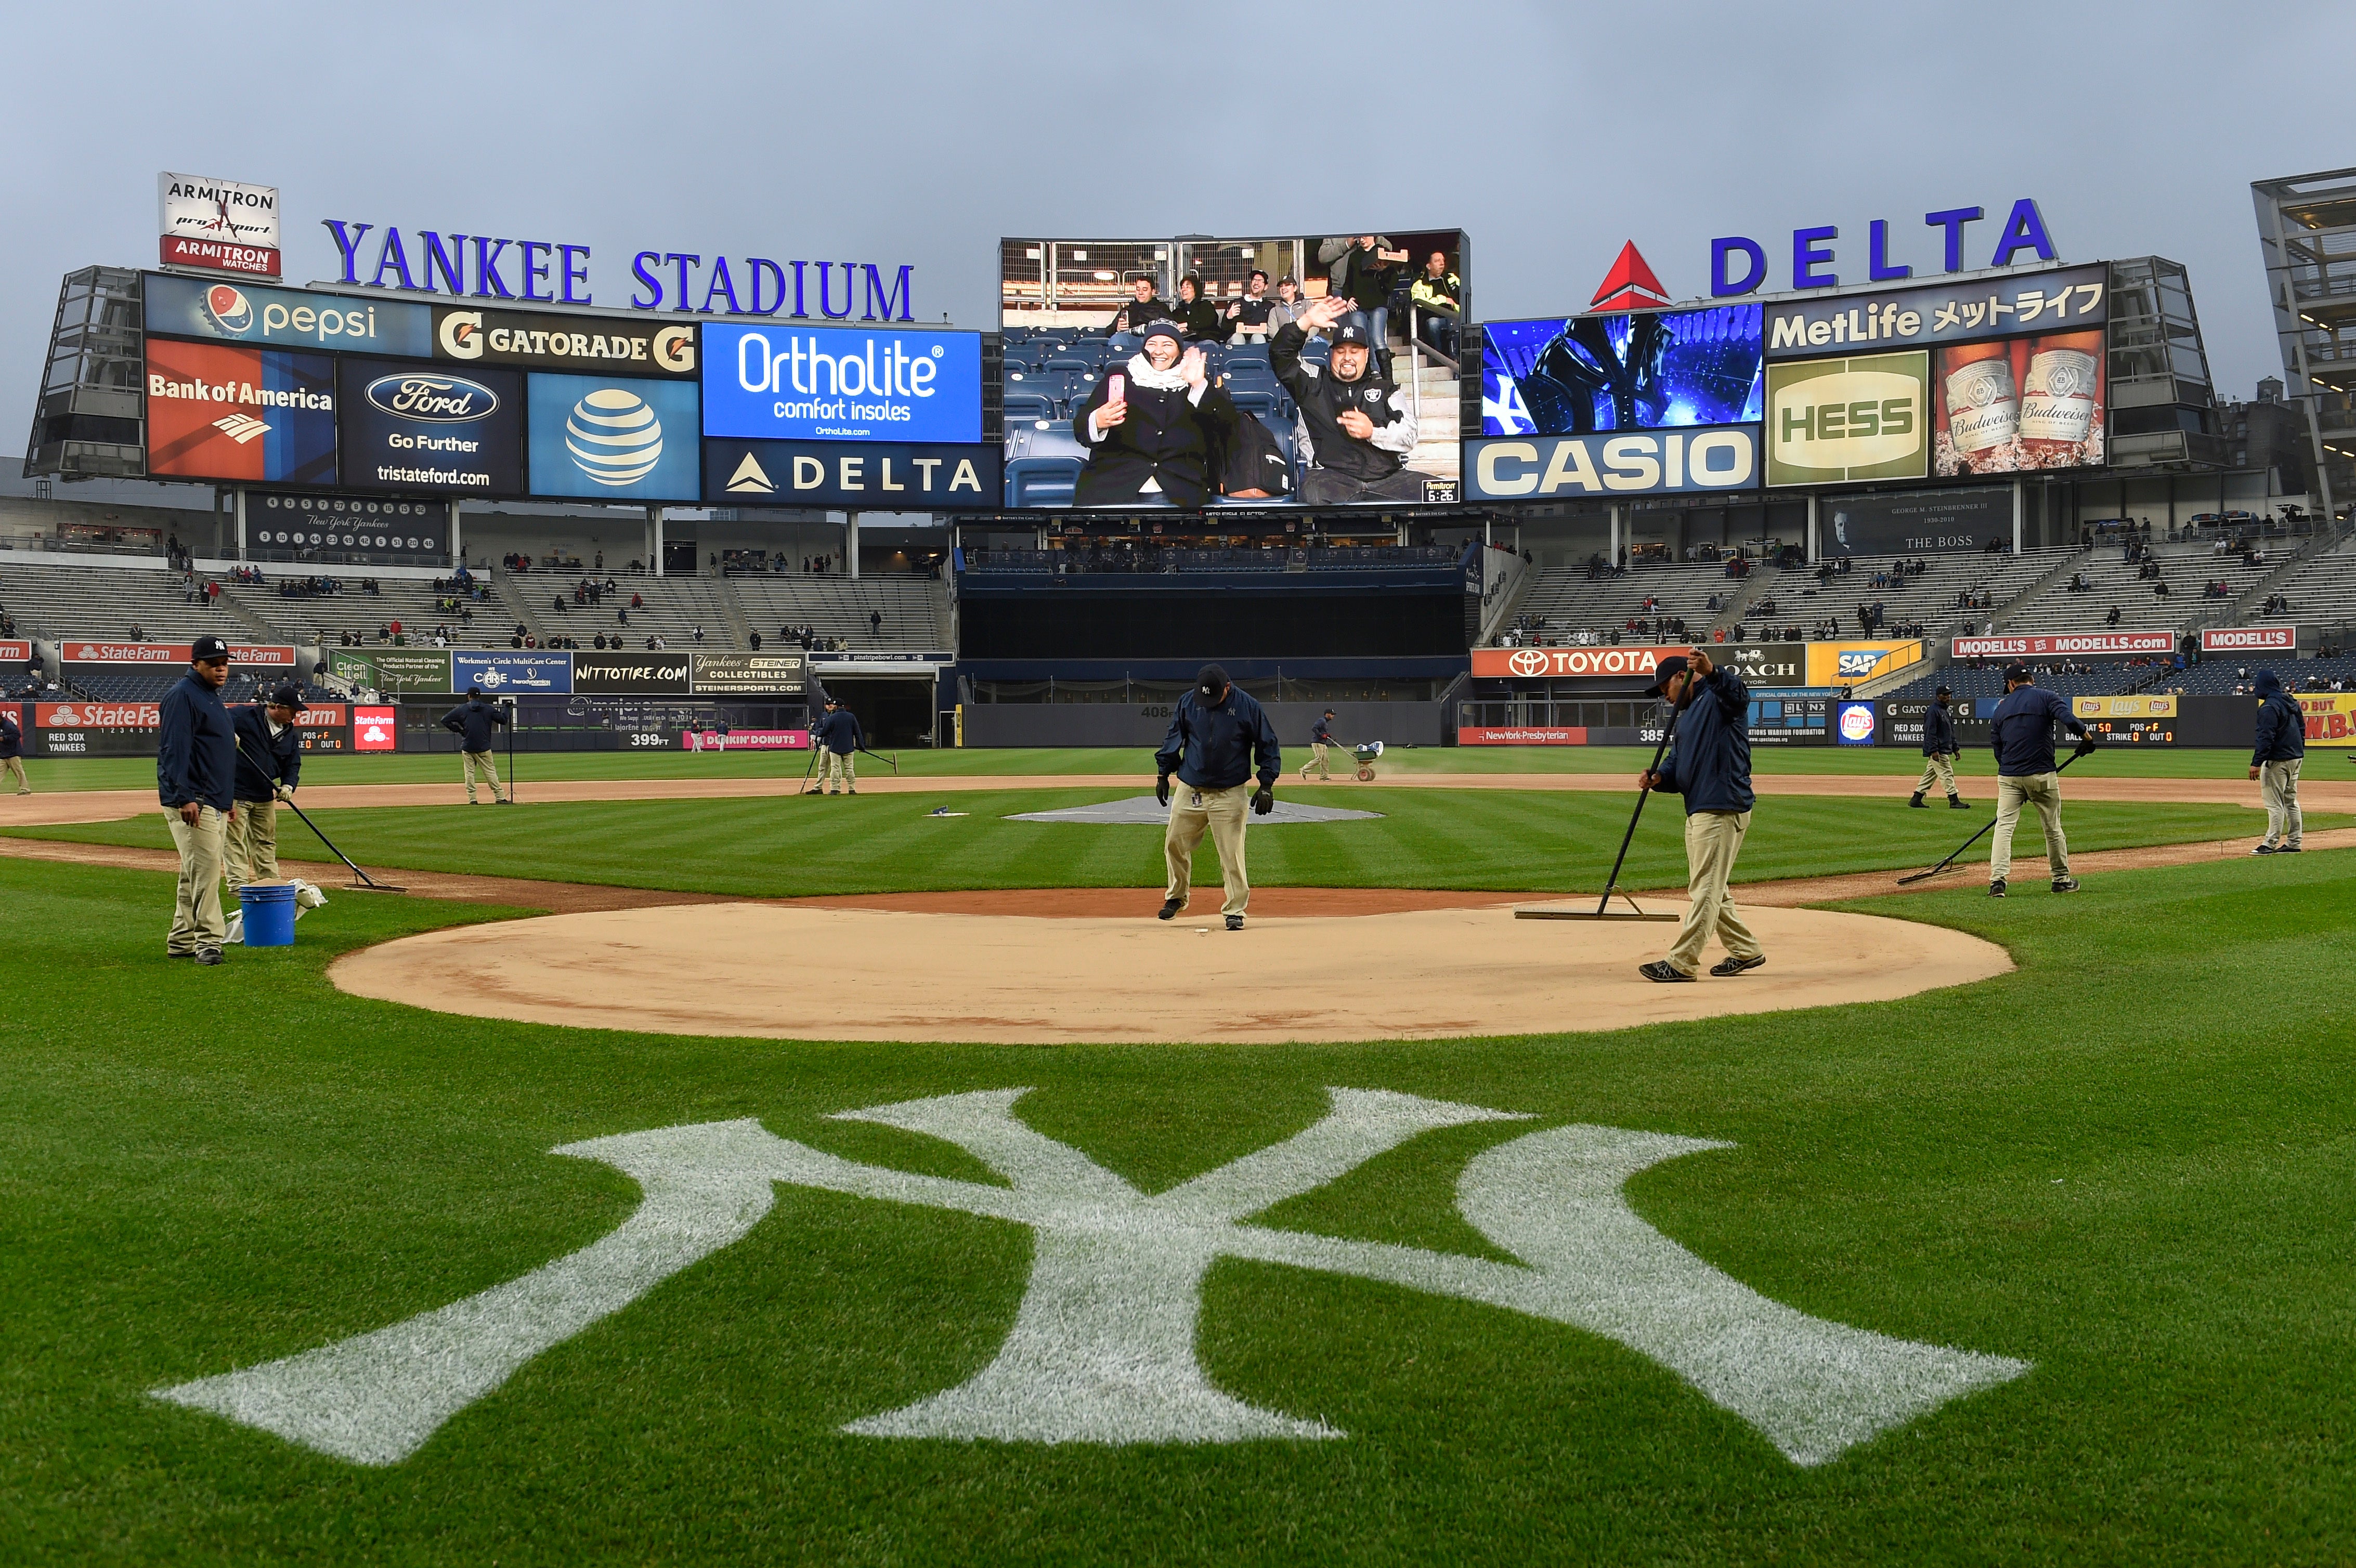 YES Network to host 20th anniversary roundtable on Yankees' 2000